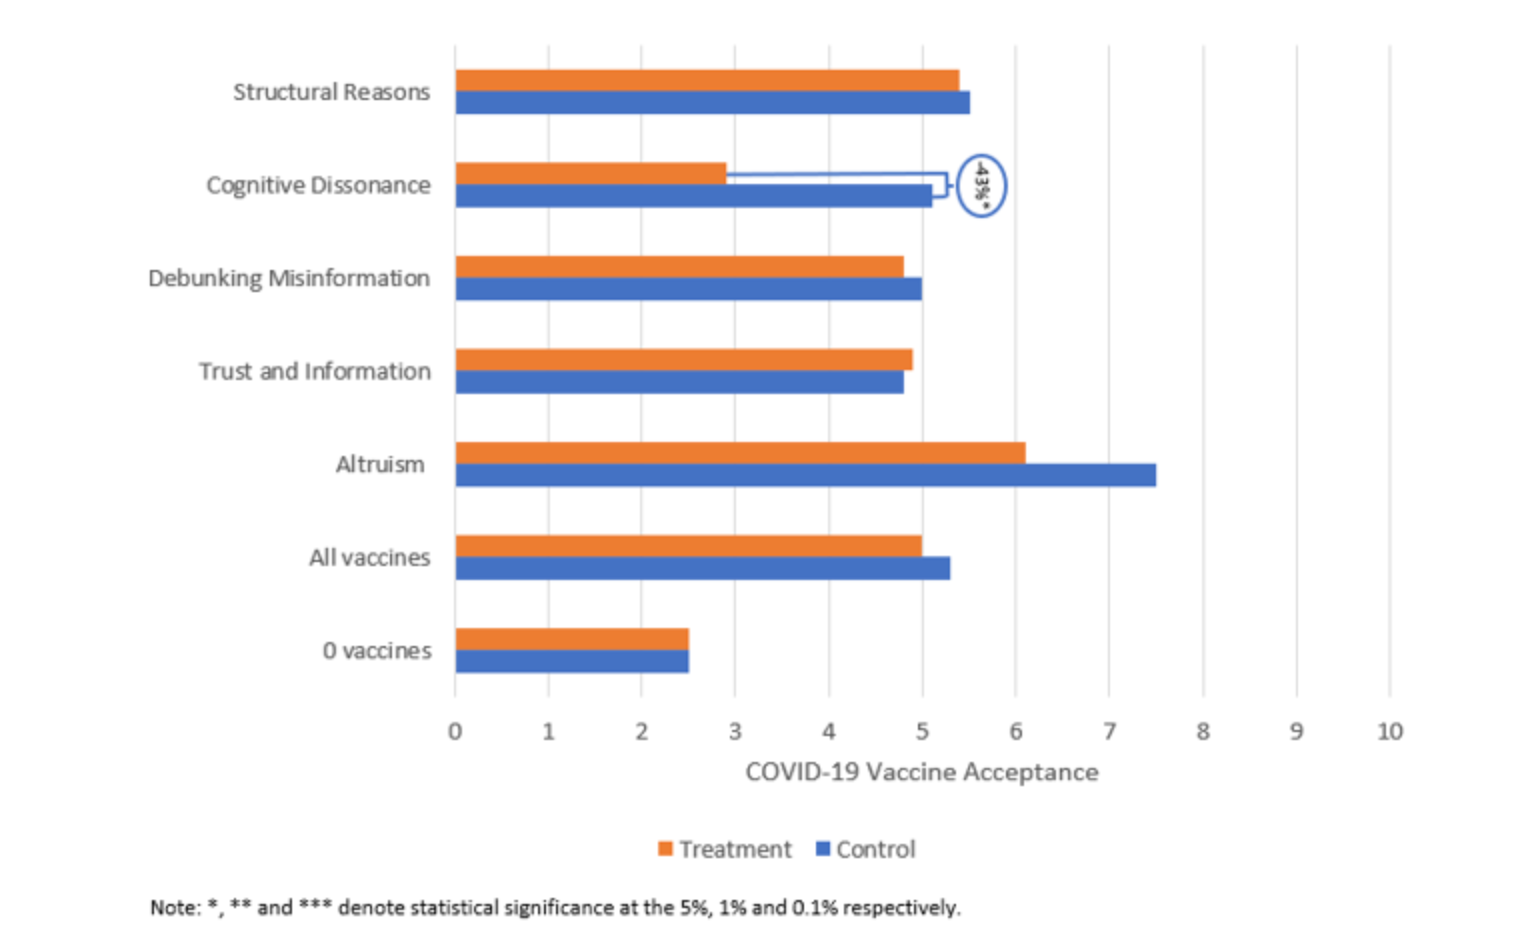 Figure 1. The public health vaccination campaign did not affect COVID-19 vaccination acceptance